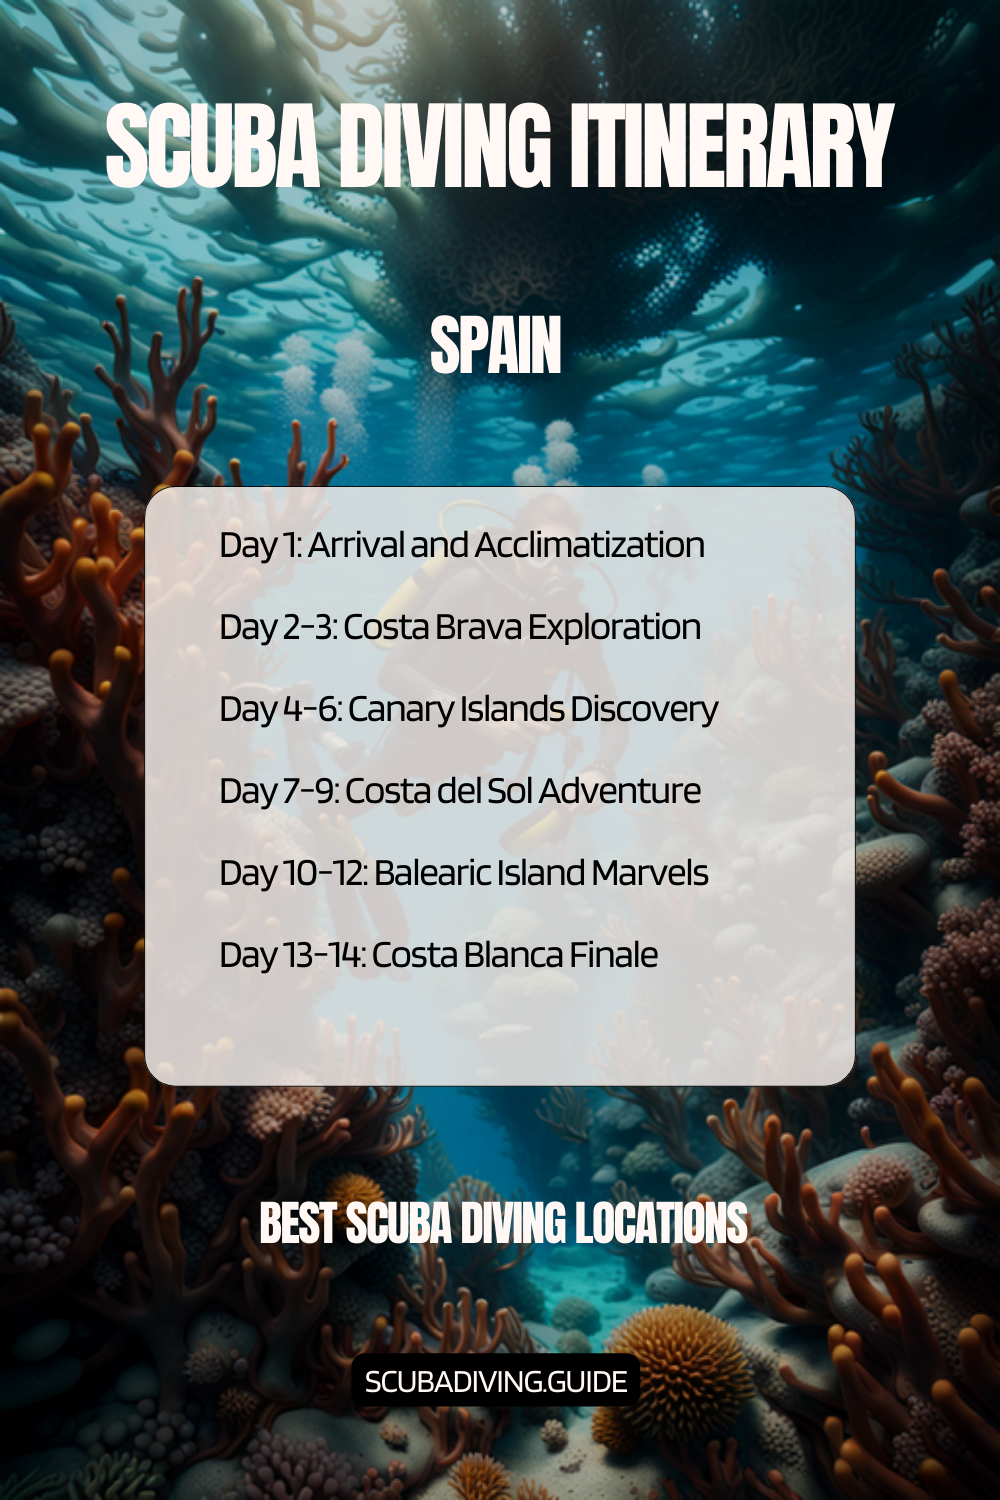 Spain Recommended Scuba Diving Itinerary